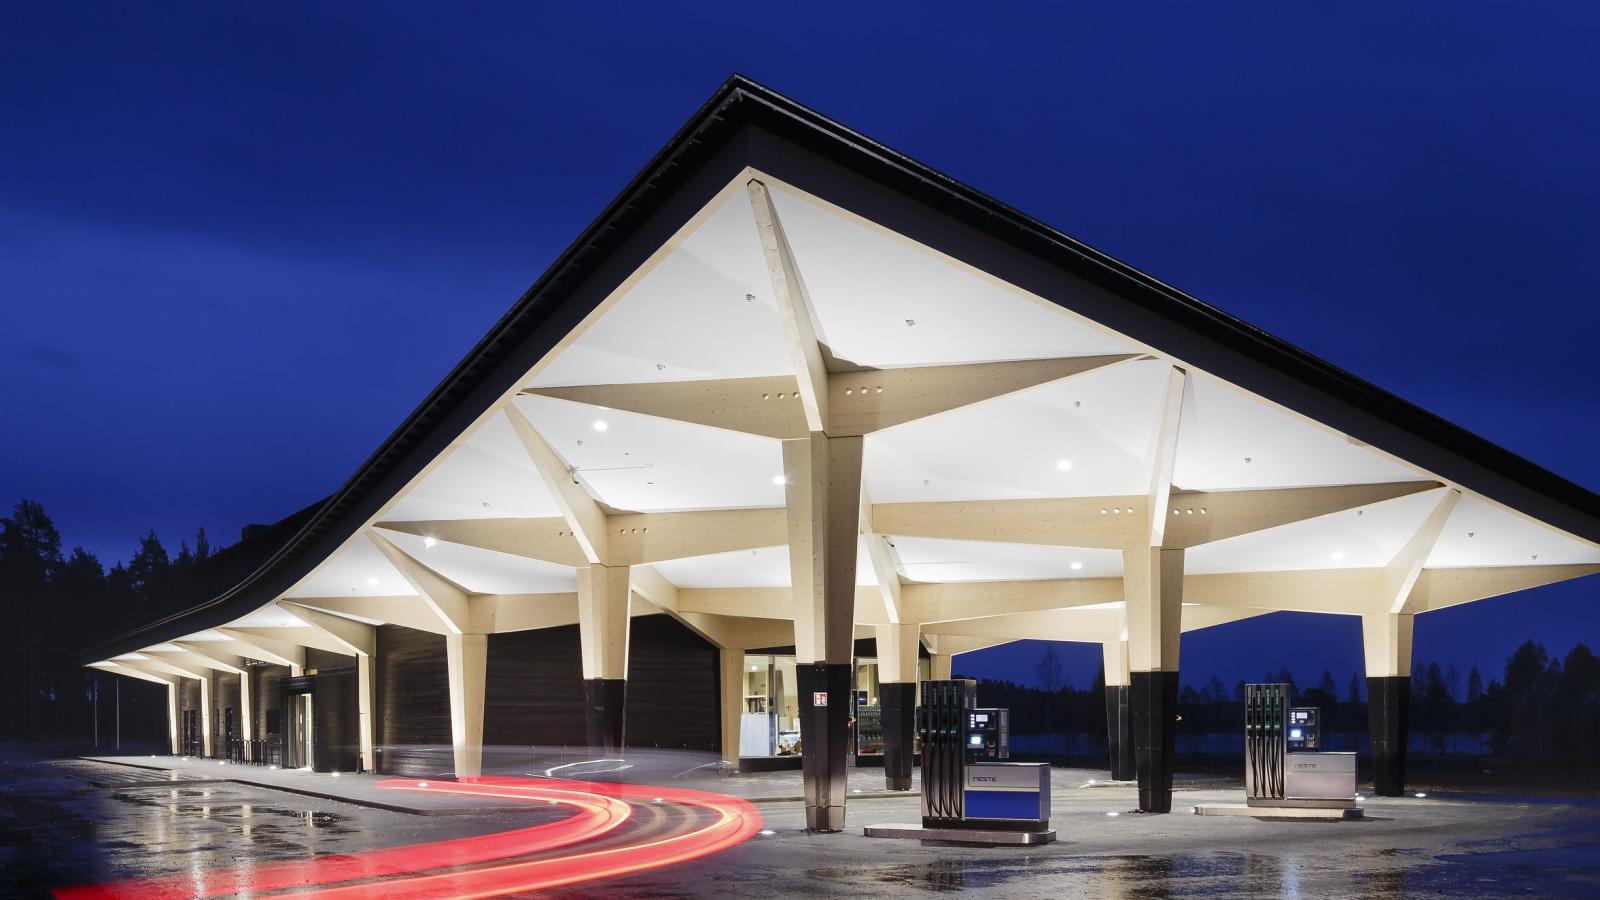 The 10 most beautiful gas stations in the world, ranked